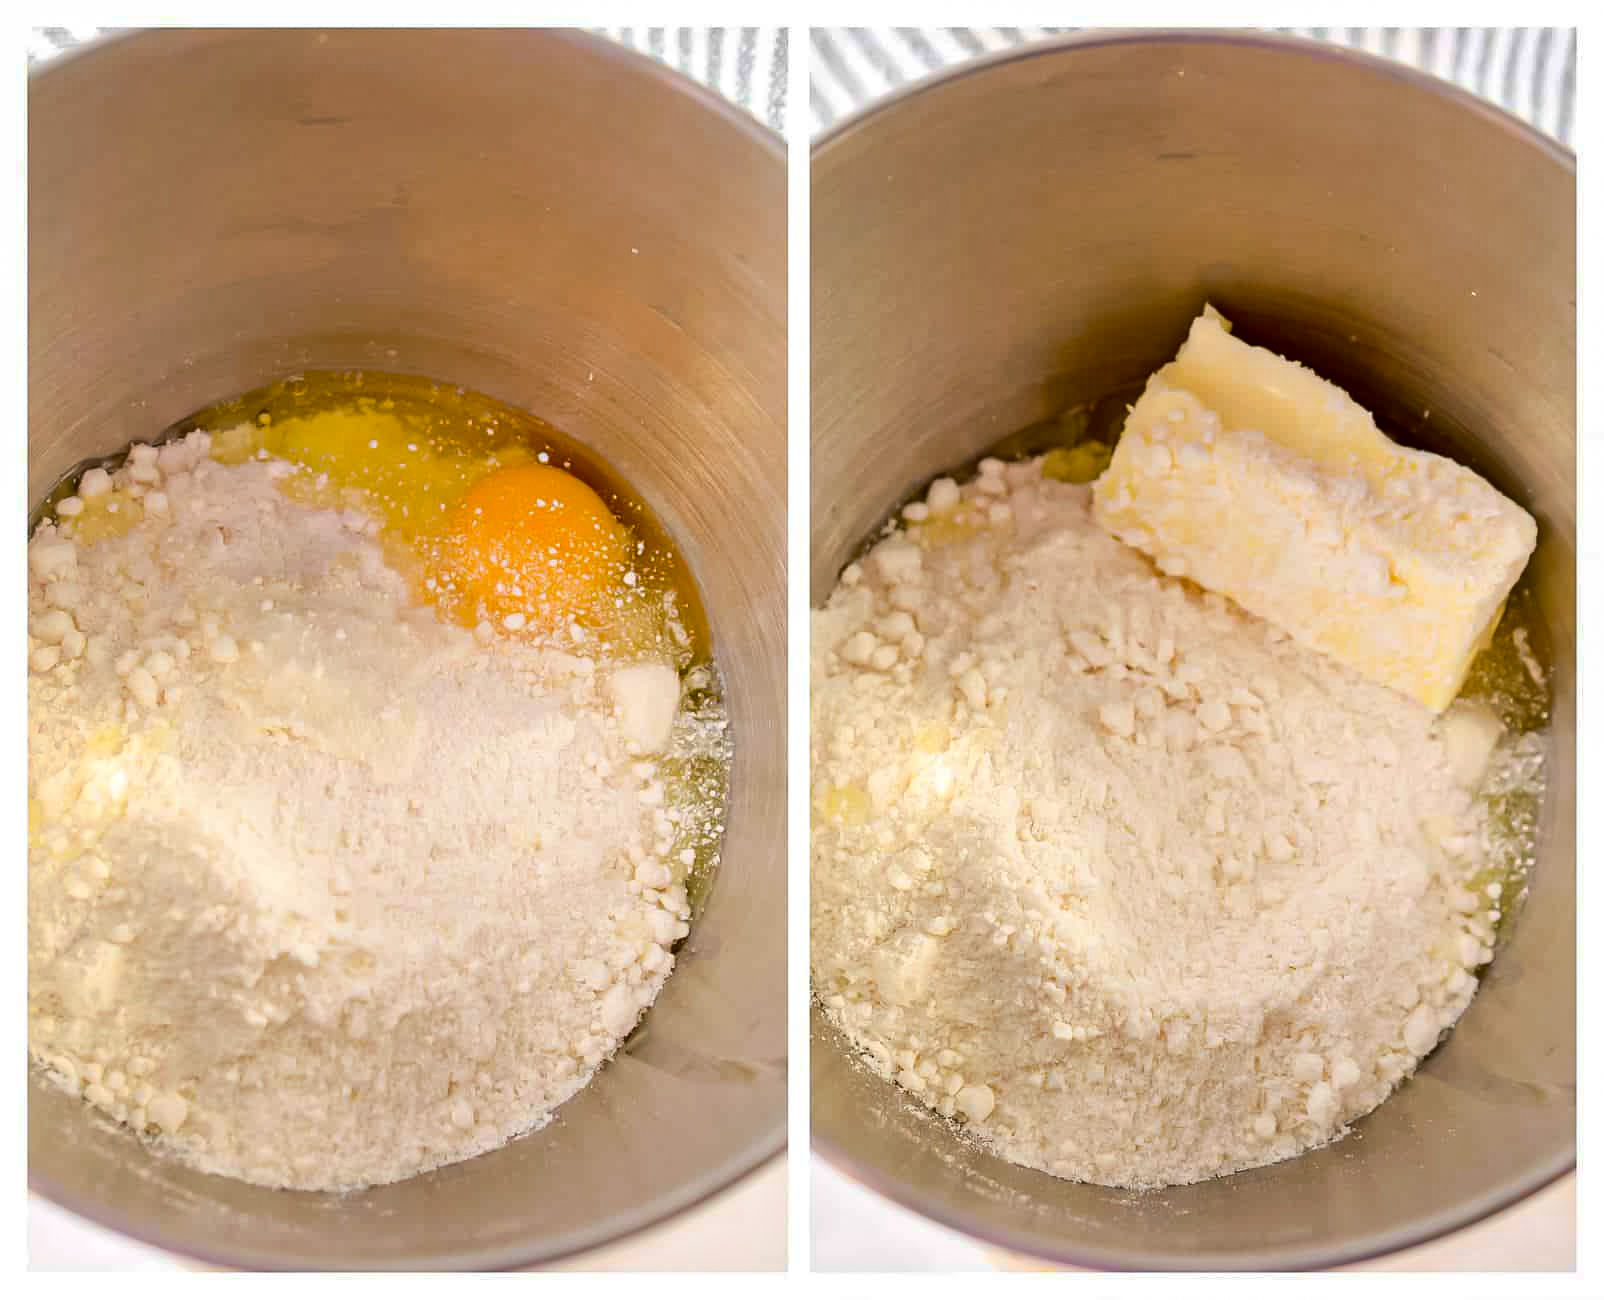 In a mixing bowl, combine the white cake mix, softened butter, and 1 large egg with a fork until it forms a crumbled mixture.